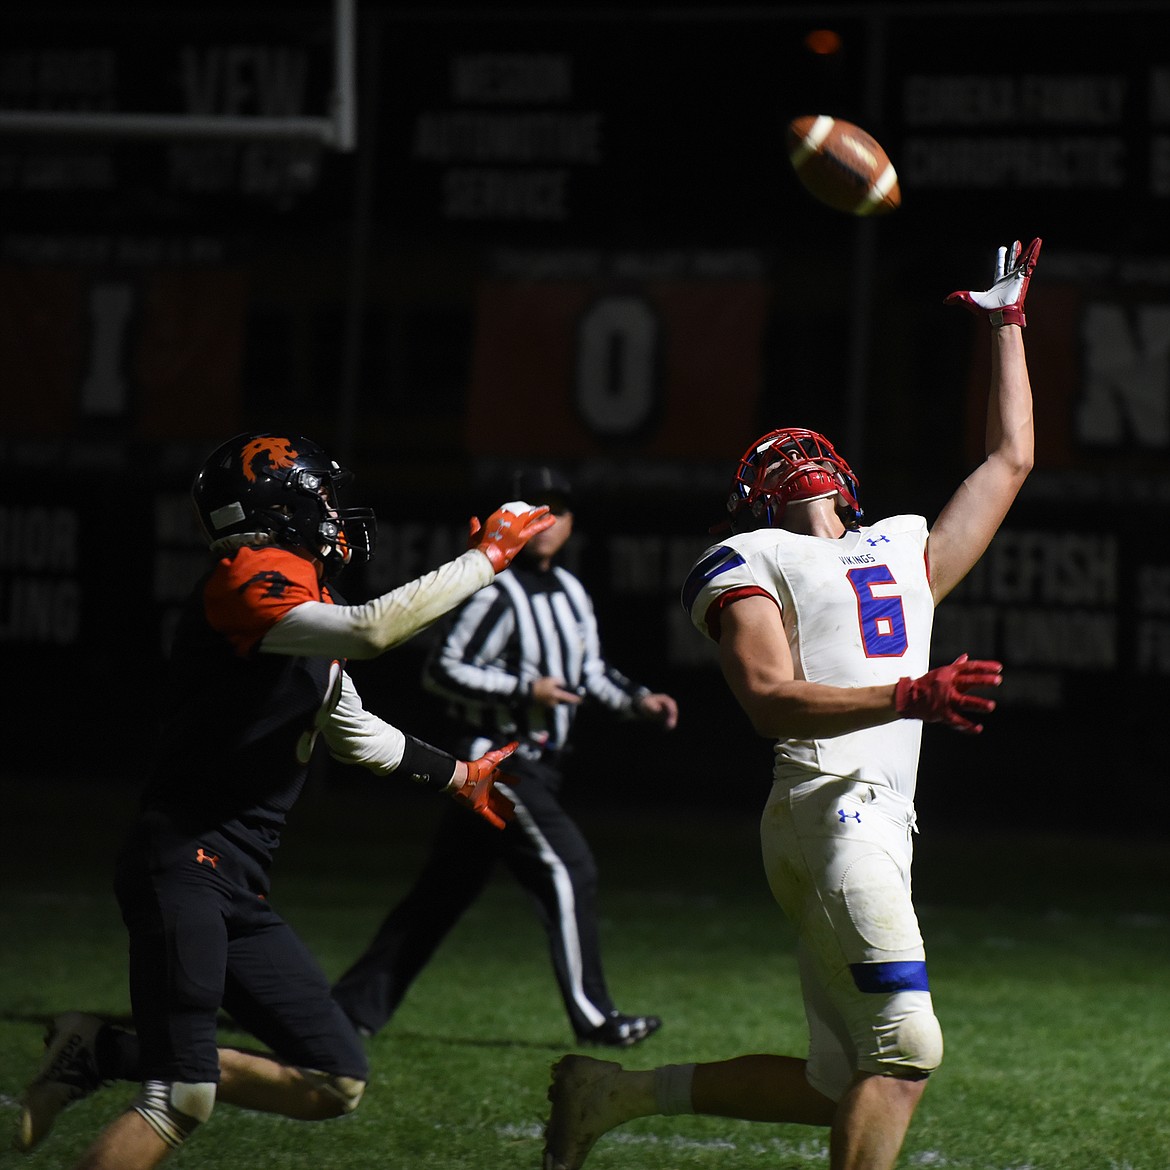 Bigfork receiver Nick Walker tries to come down with a pass in the end zone at Eureka Friday. (Jeremy Weber/Bigfork Eagle)